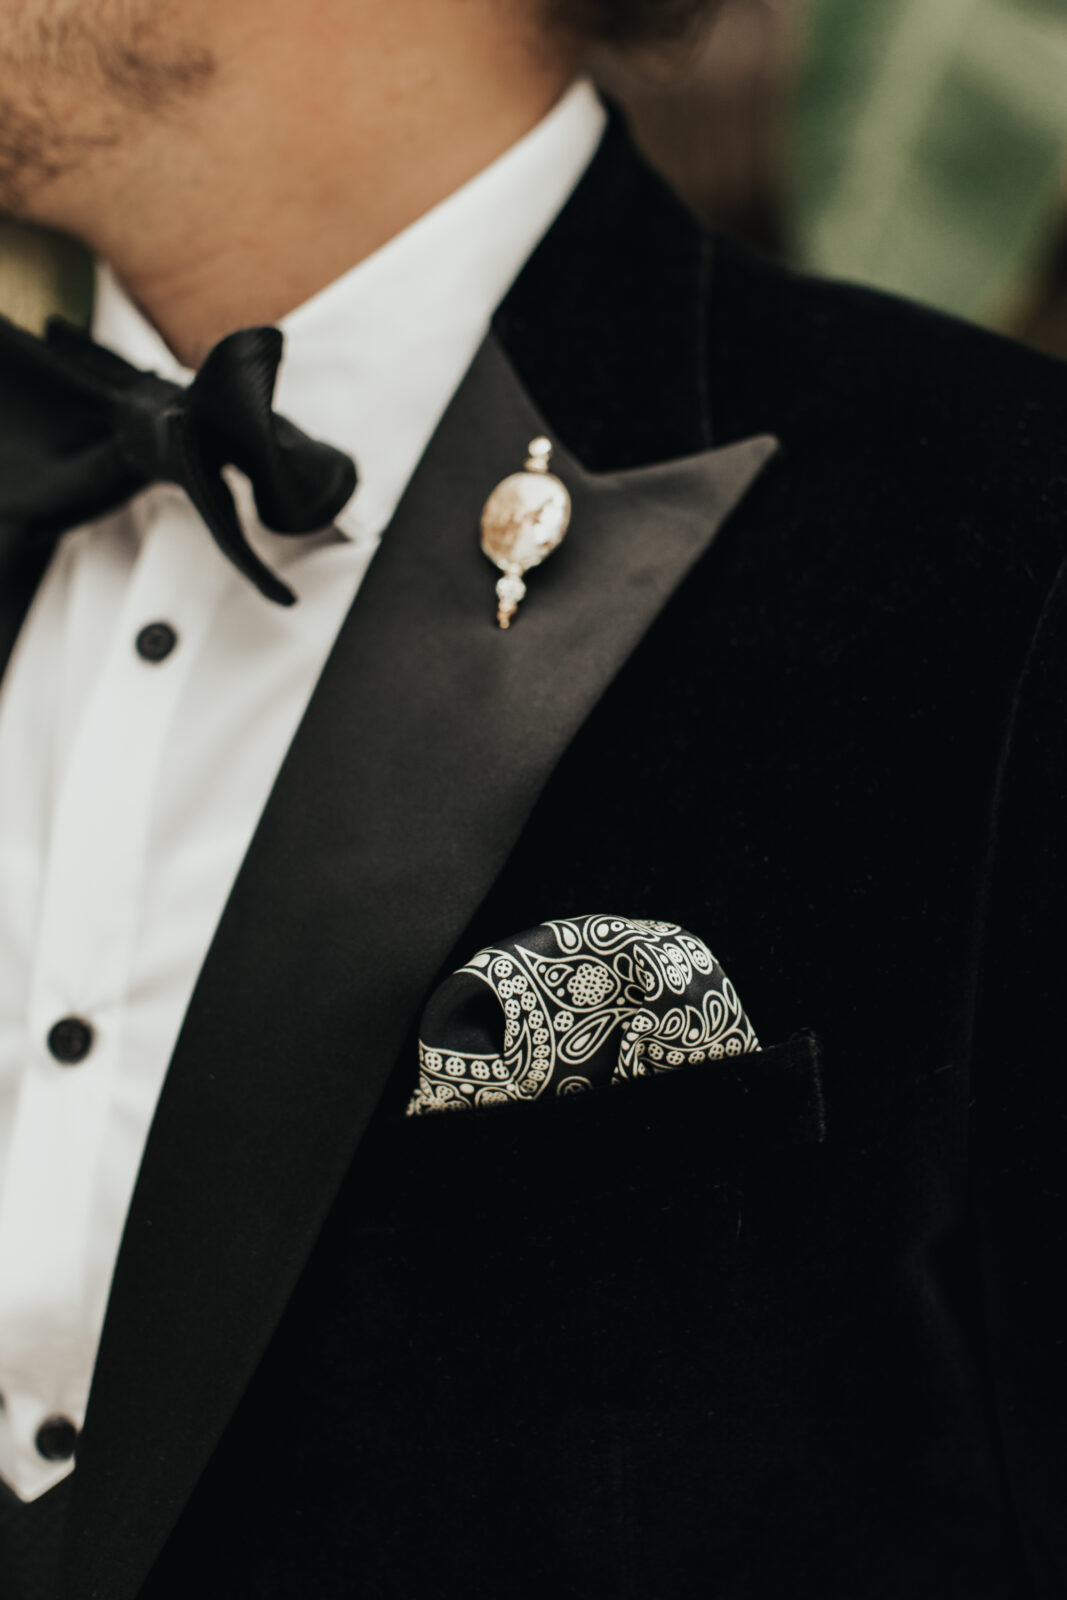 Groom wedding suit inspiration. High class wedding suit. Black tie event suit. Groom wedding suit in gorgeous Cancun, Mexico.